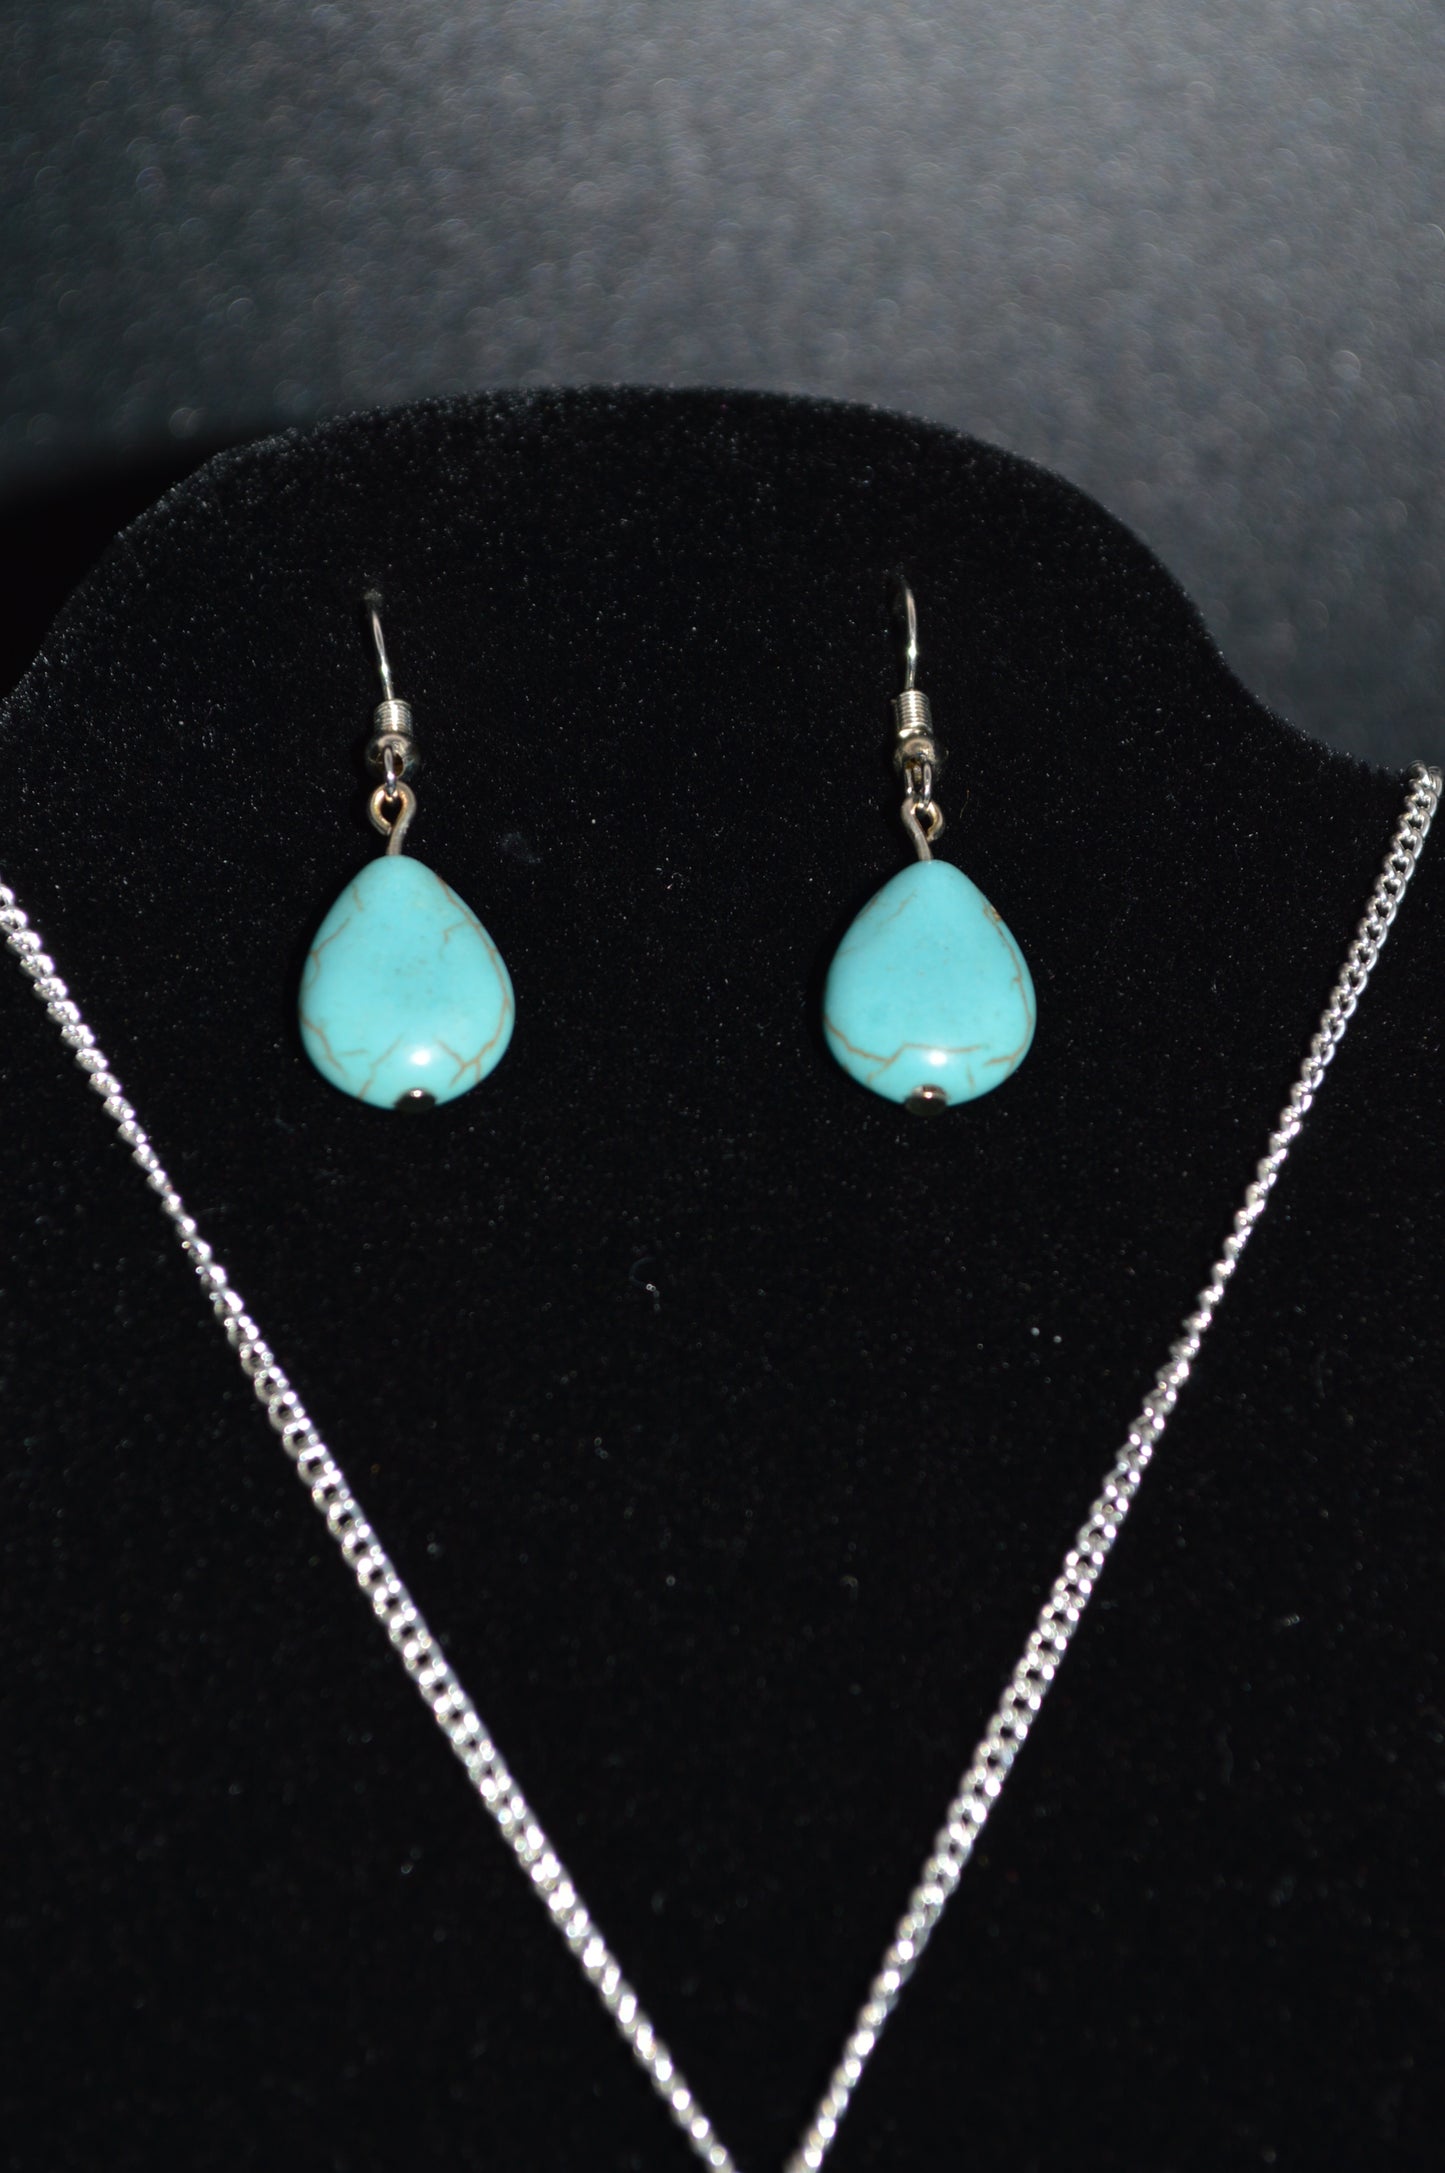 Resin Large Teardrop Pendant Necklace and Earring Set (Turquoise)